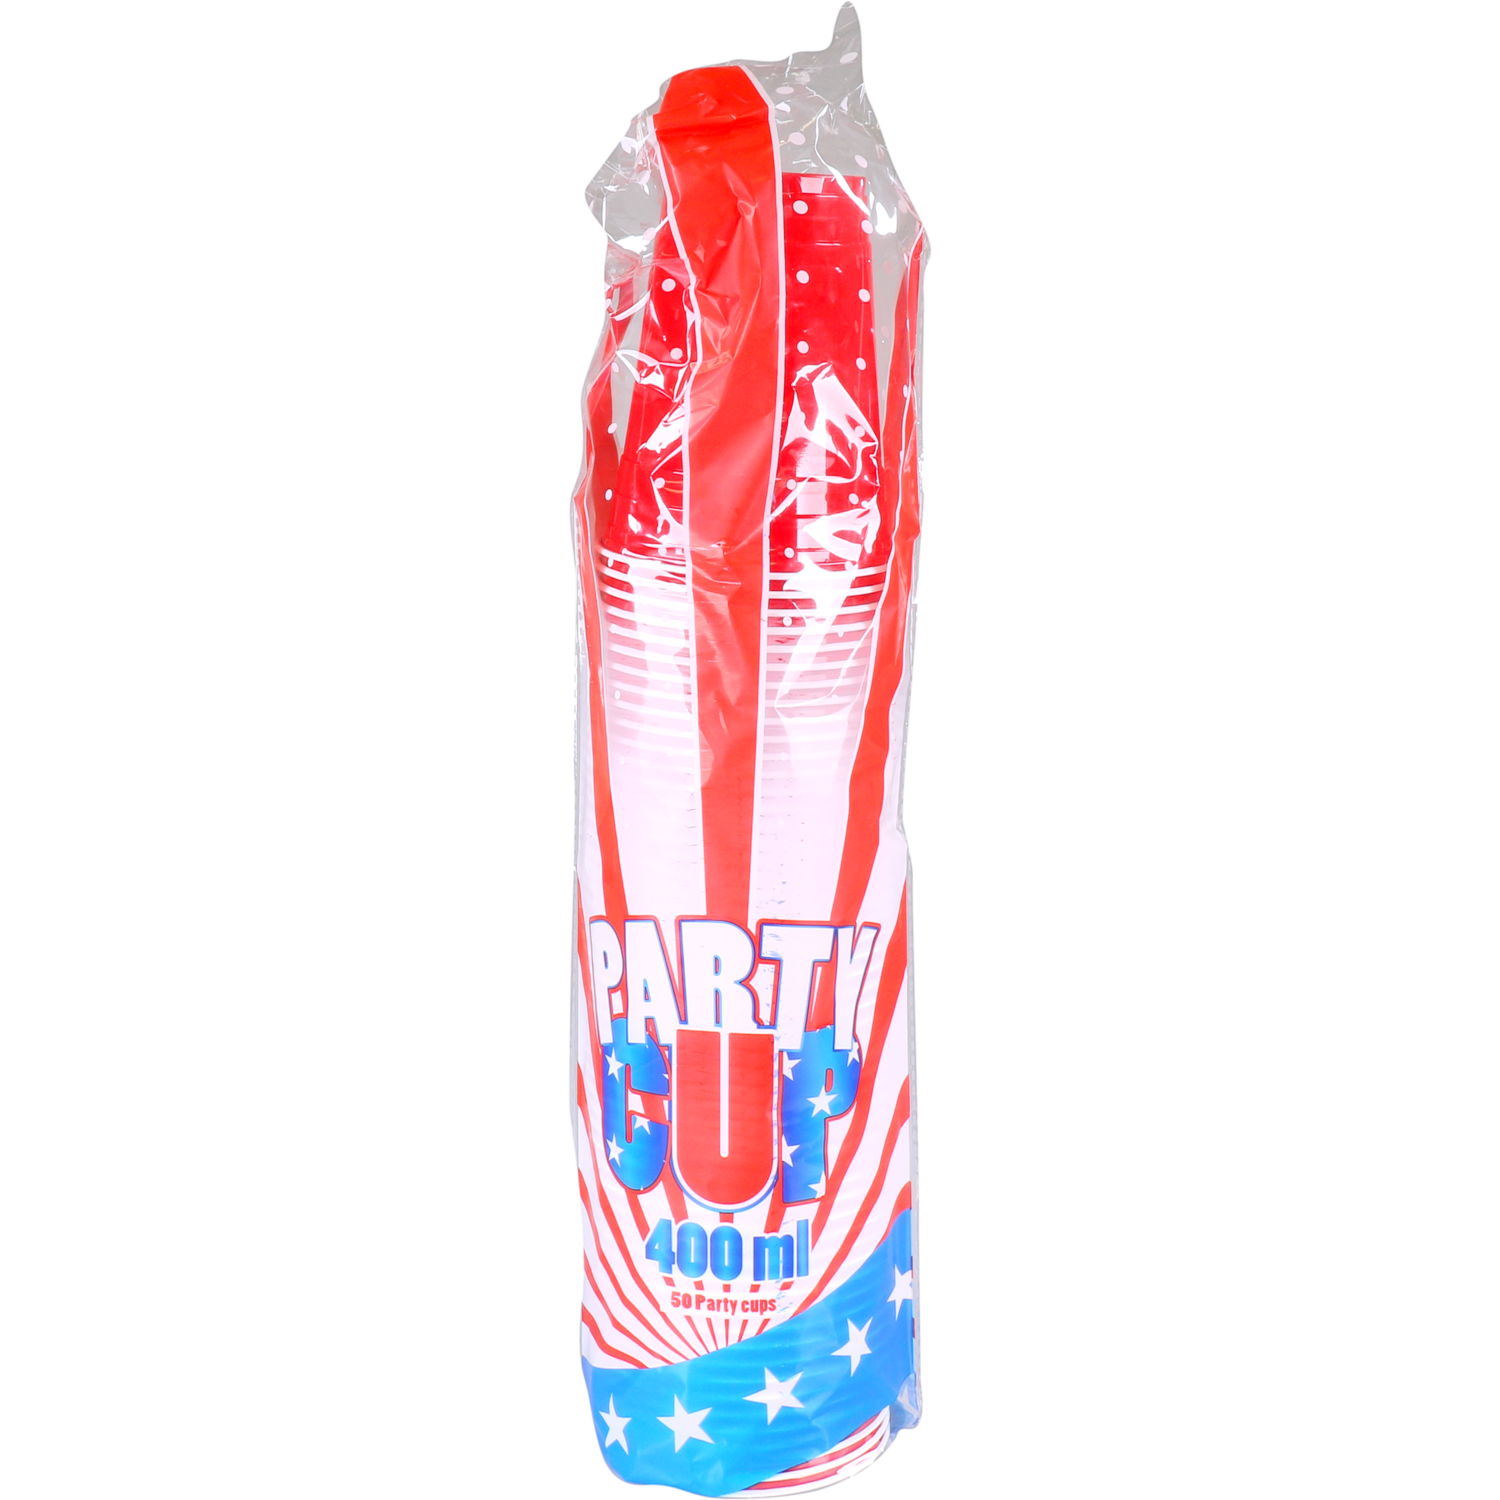  Partycup, PS, 400ml, 16oz, rood 2